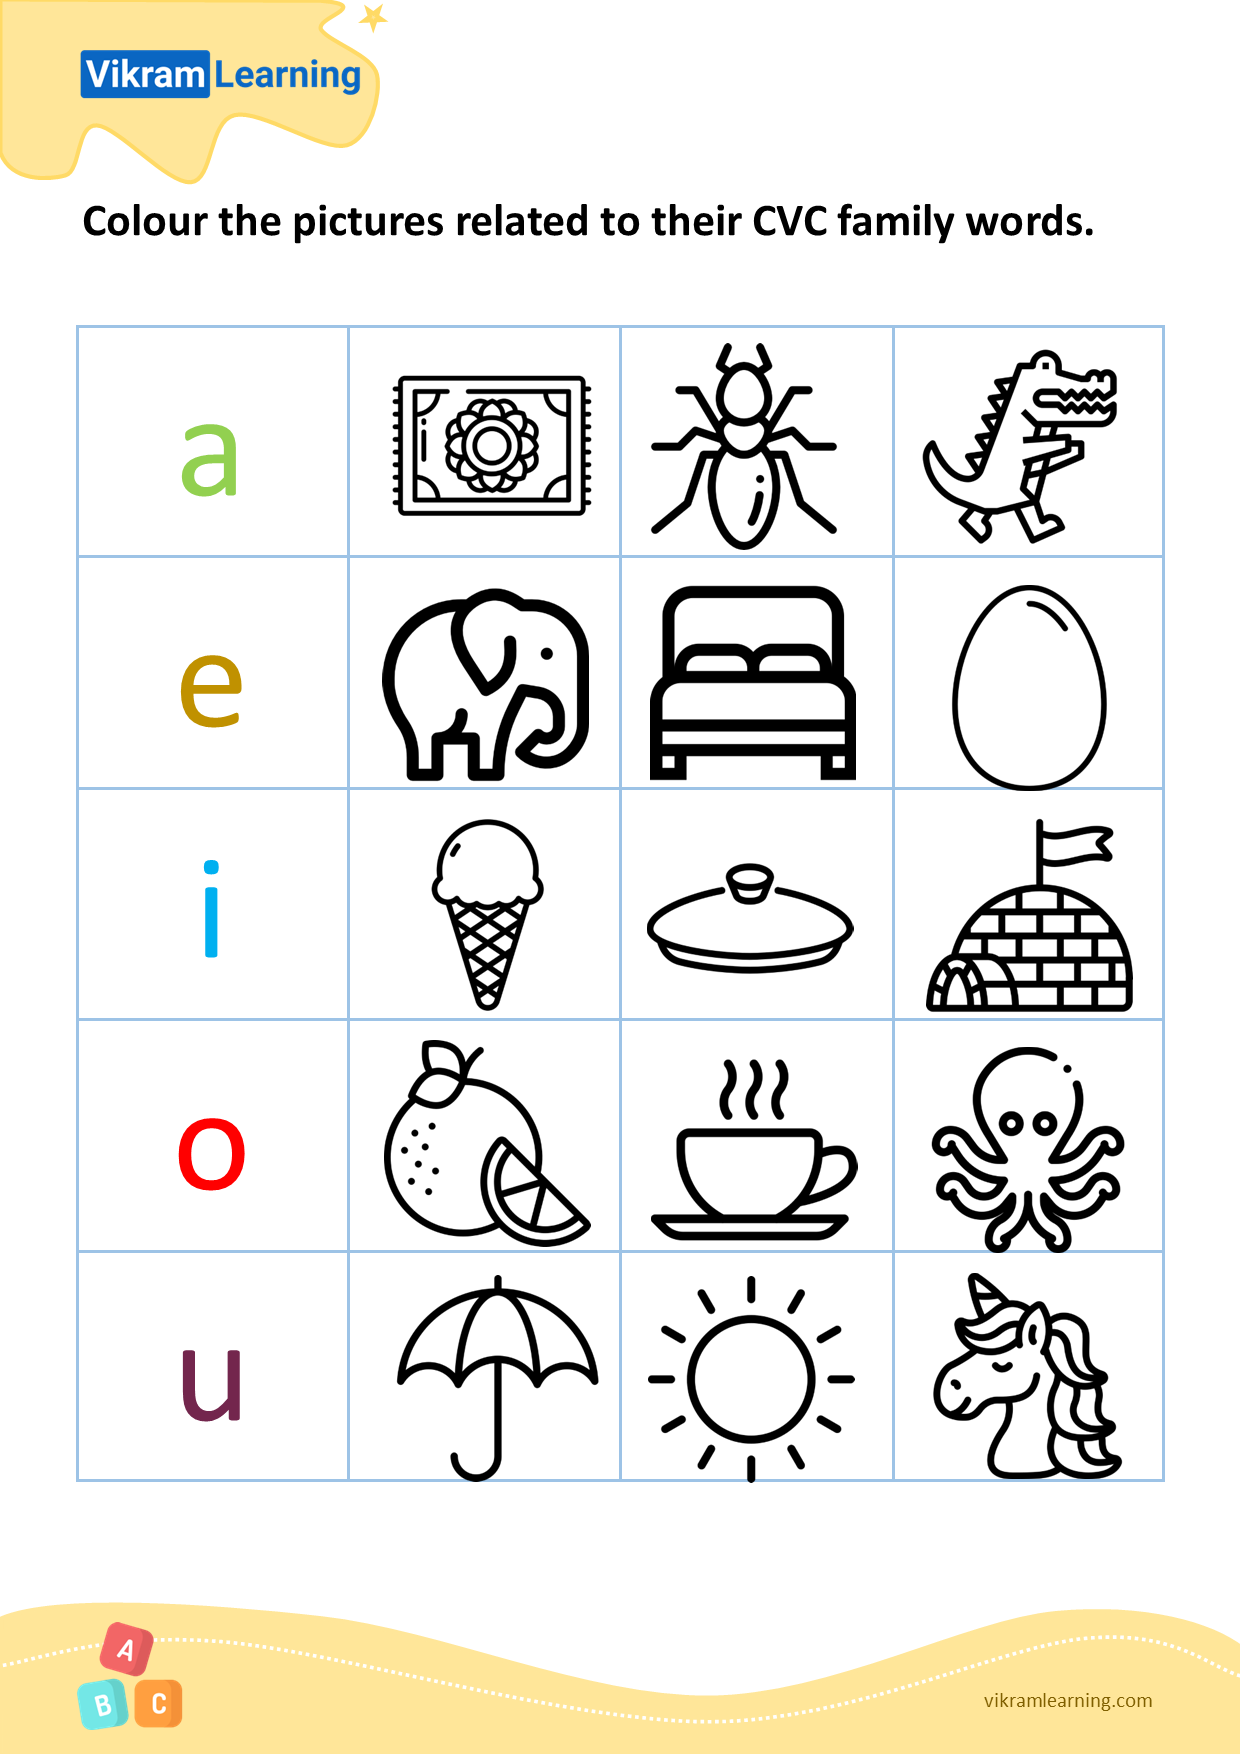 Download colour the pictures related to their cvc family words - 2 worksheets